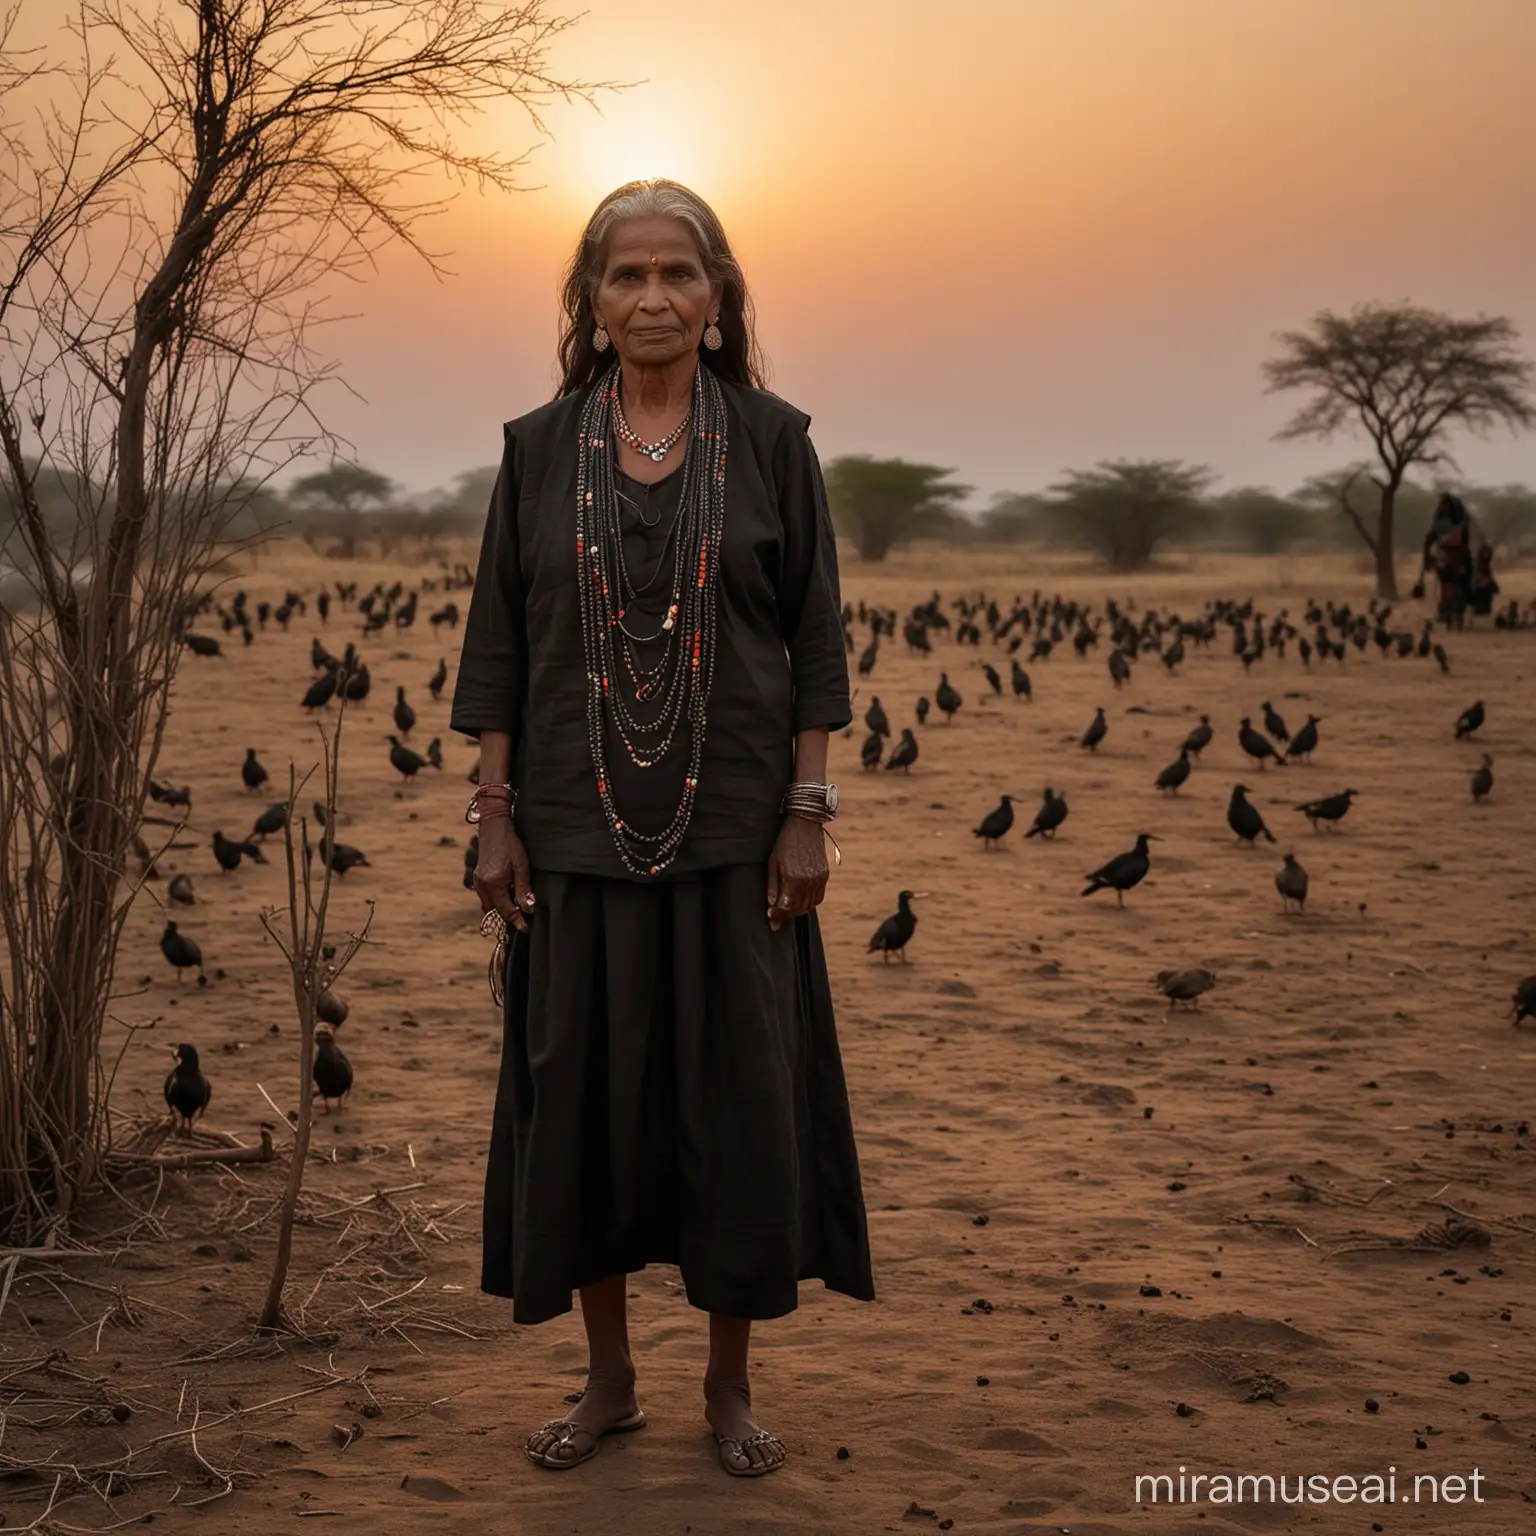   90 years  very old   dark aged skin tribel rabari  gujarat women india in black clothing   and jewerelly    standing  in landschape with dead threes and some birds by late sunset   light full wide  total body foto realistisch detailted fuji xt3  